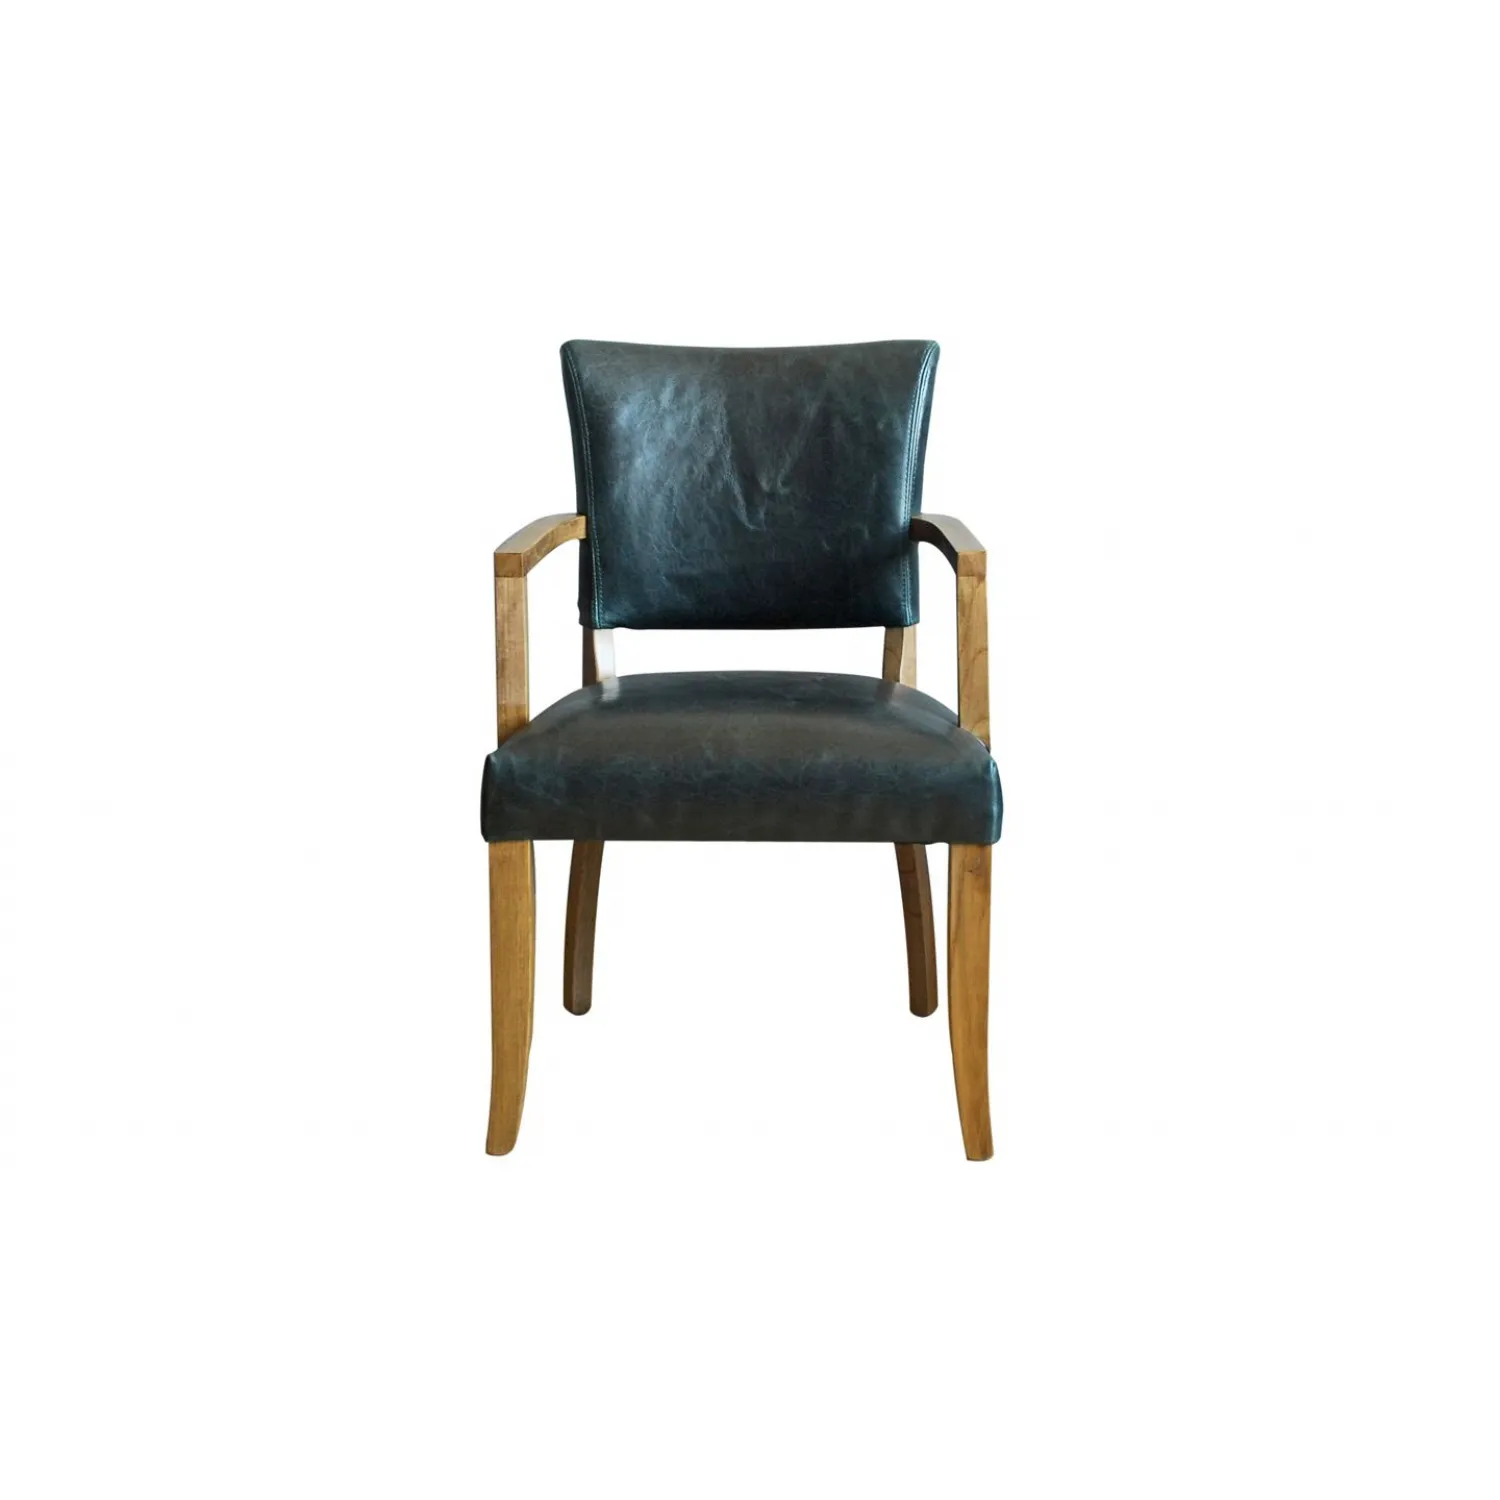 Blue Leather Padded Arm Chair with Solid Oak Legs